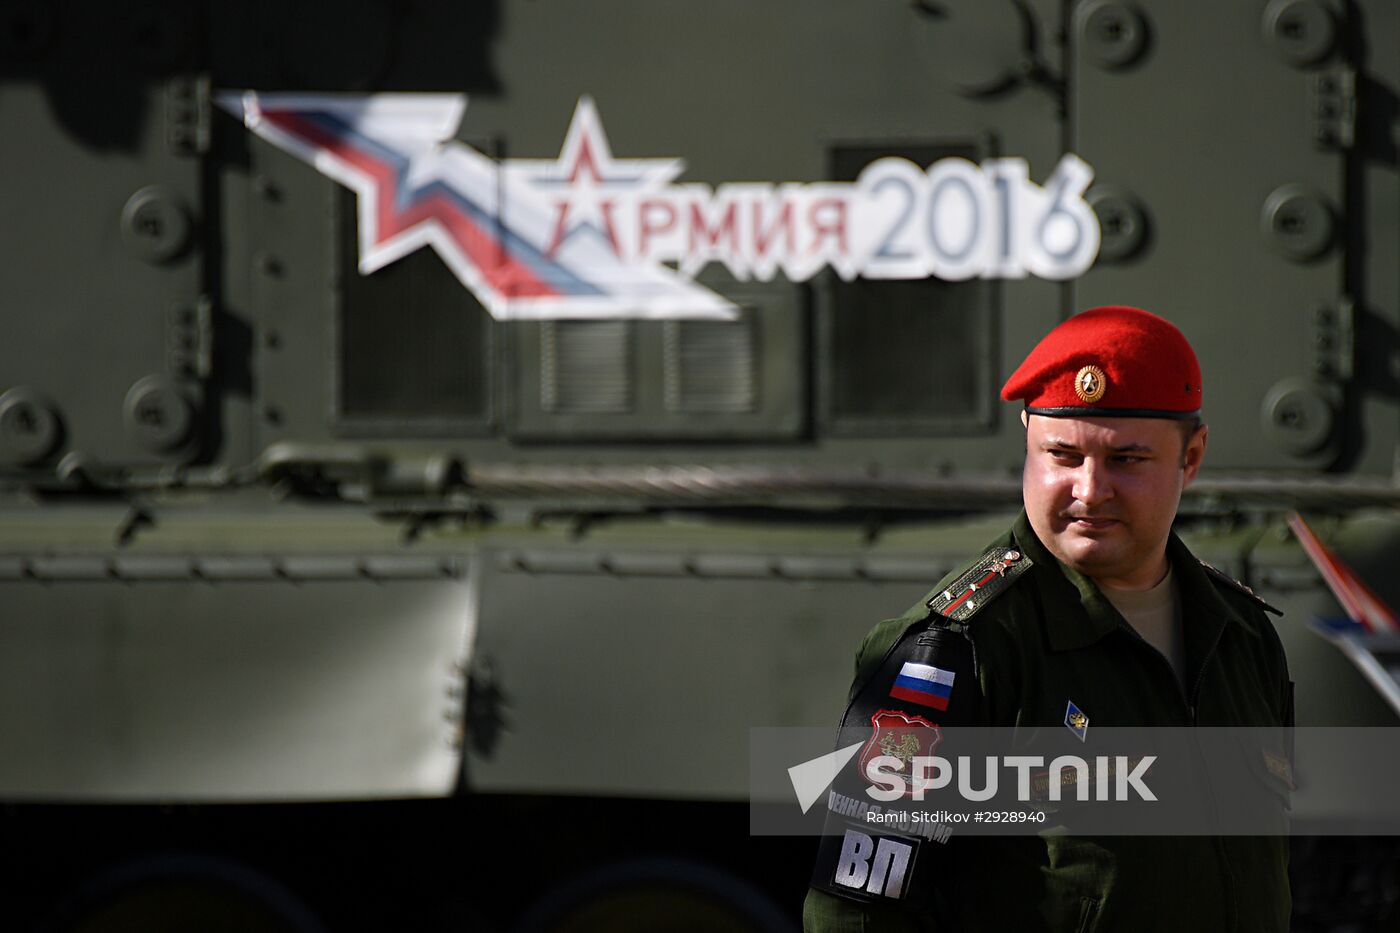 Opening of 2016 ARMY Military Forum